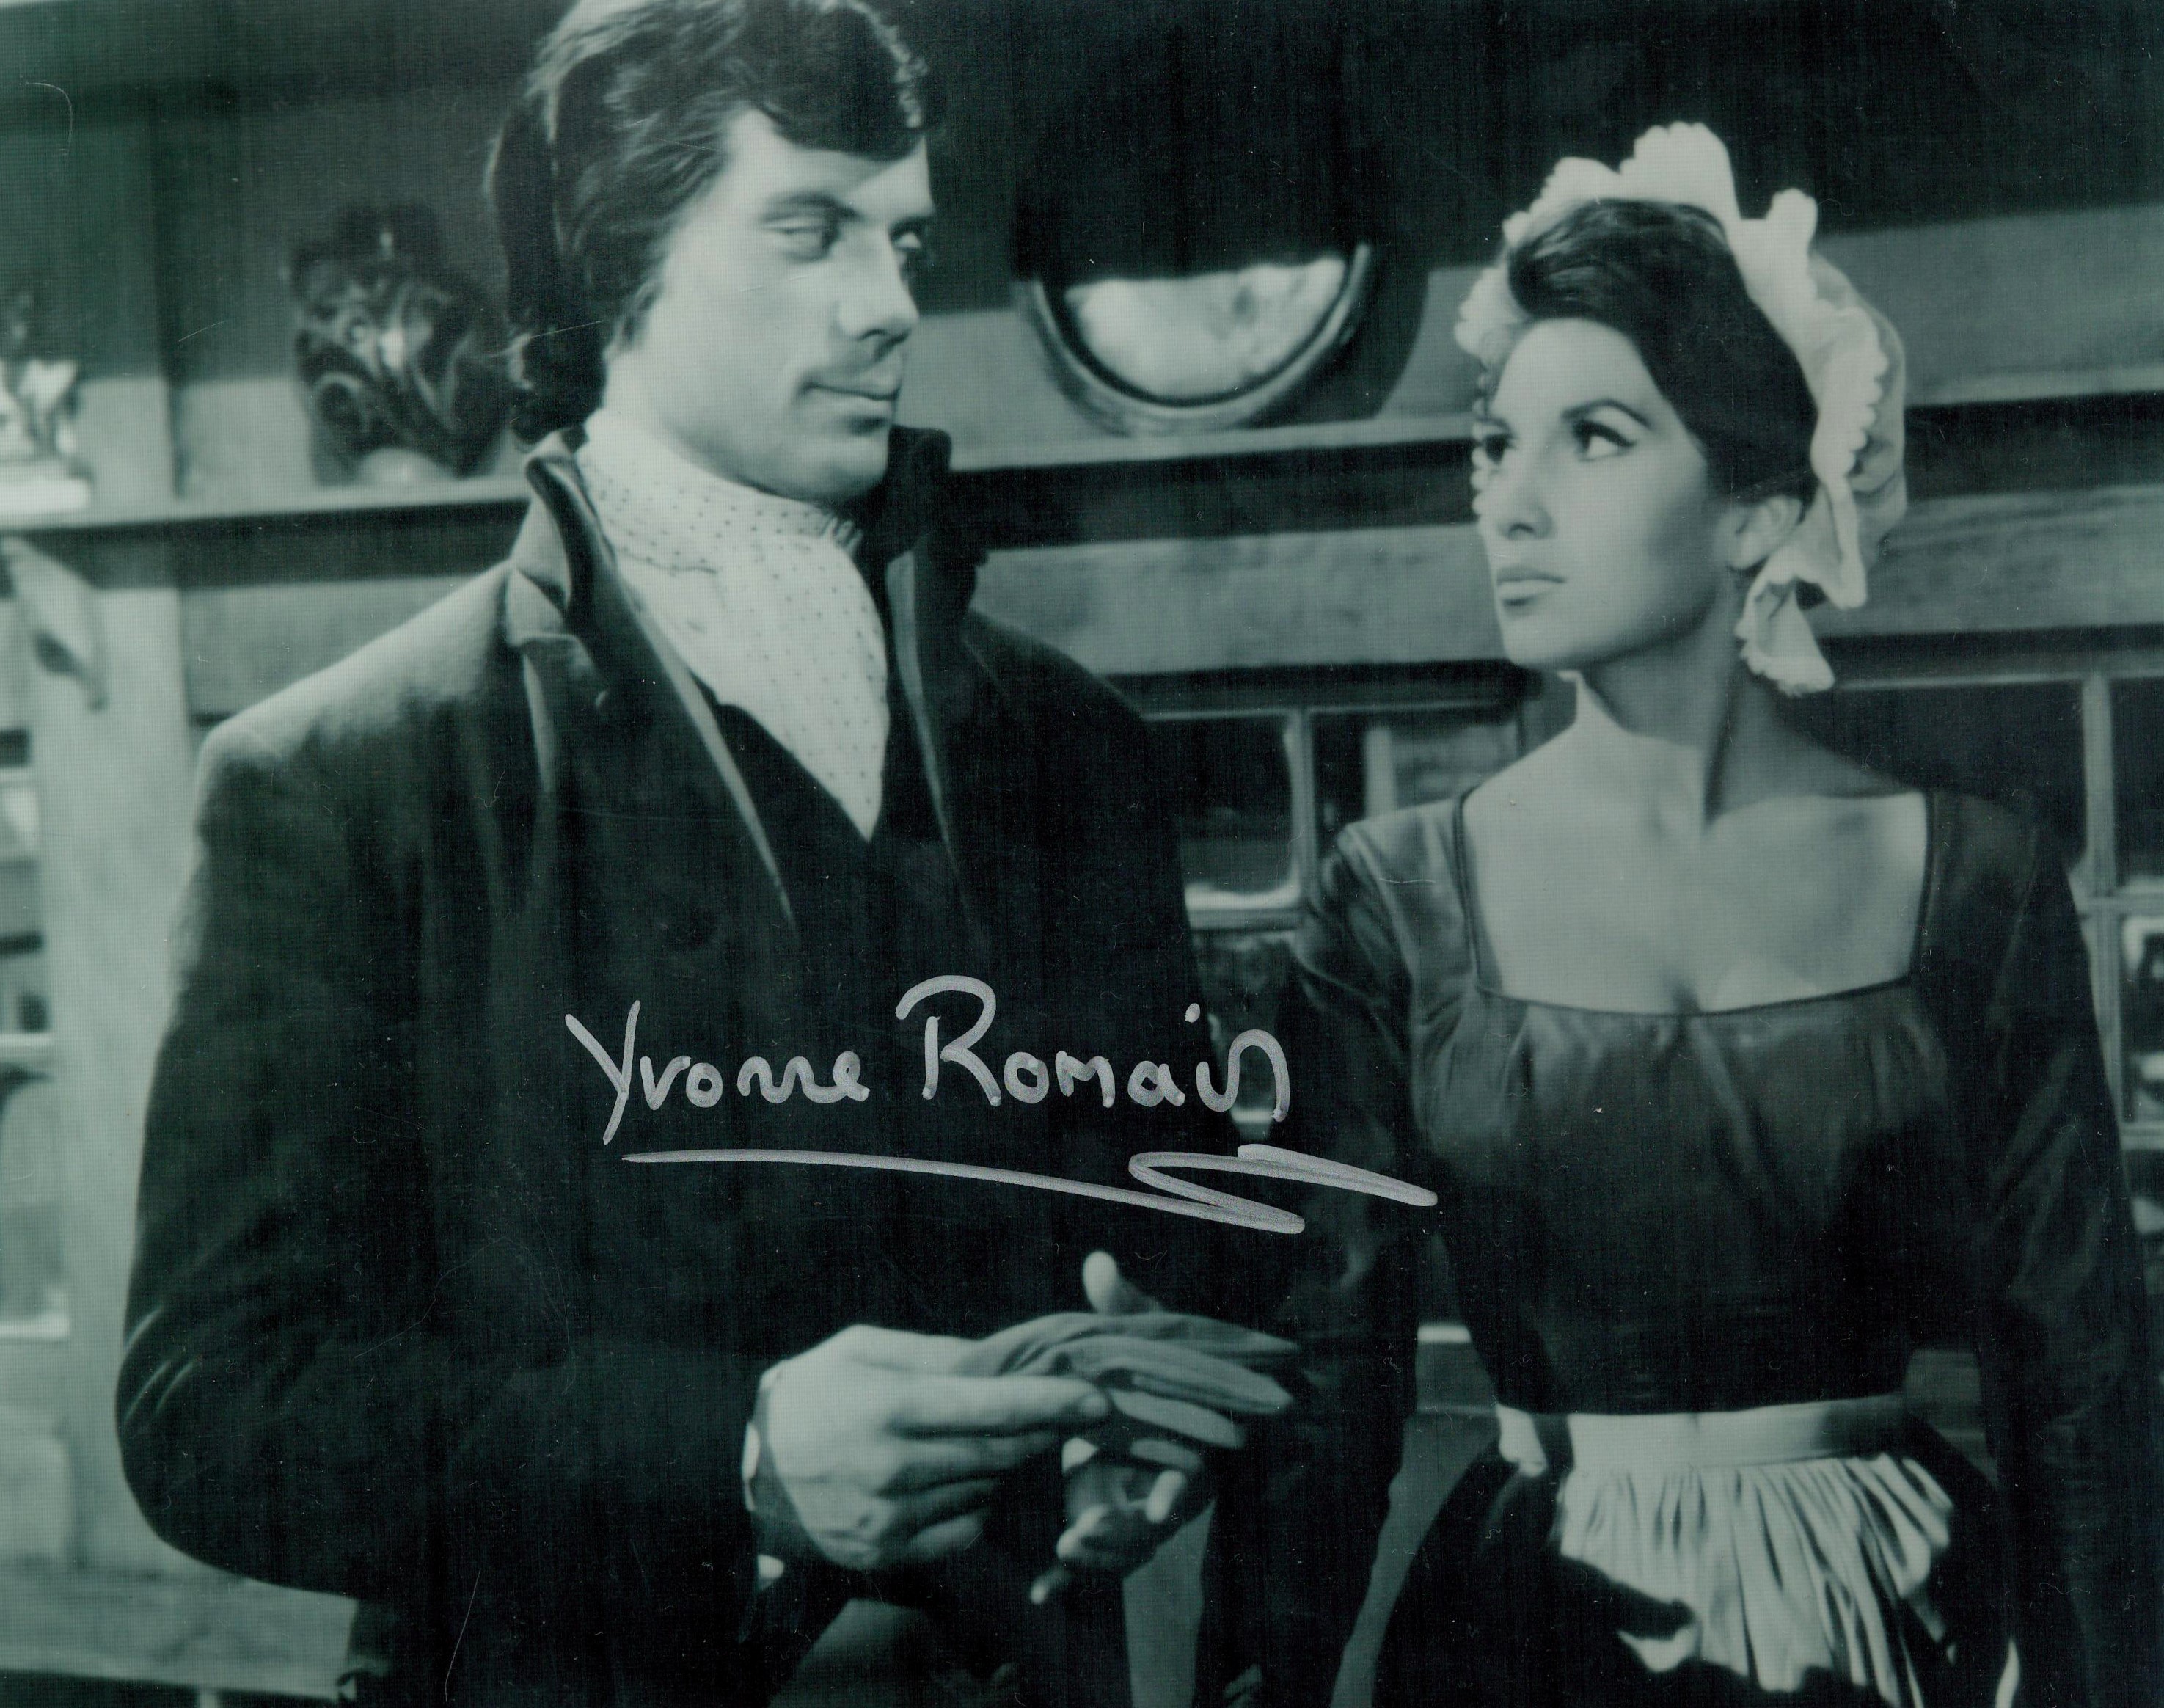 Yvonne Romain signed 10x8 inch black and white vintage photo. Good Condition. All autographs come